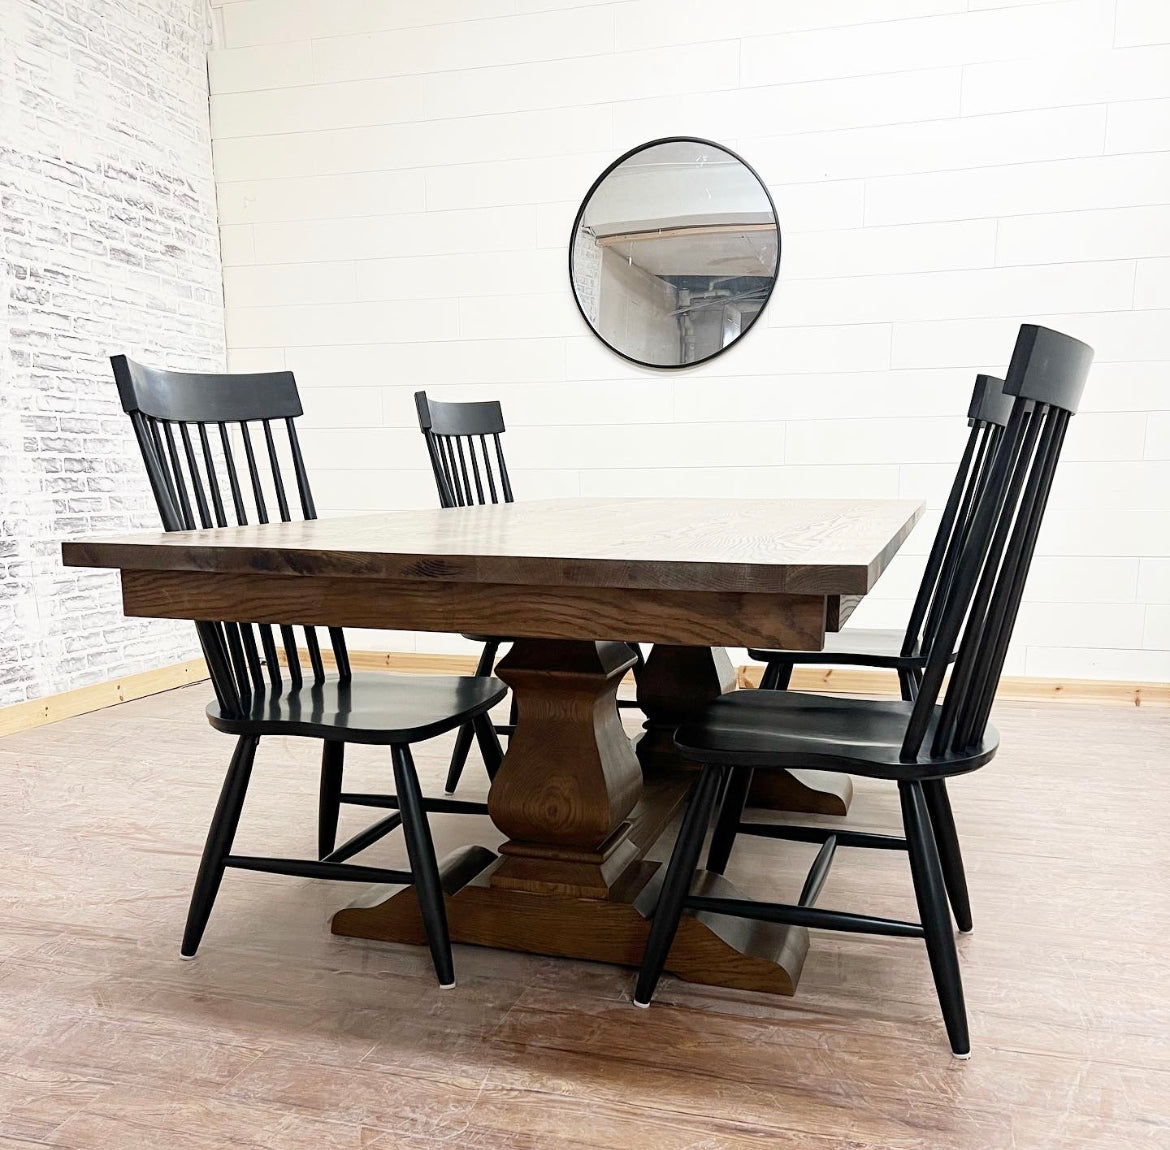 Pictured with a 7' L x 42" W Solid White Oak table and two 12" Removable end caps with Espresso stain. Pictured with four New England Dining Chairs stained Black.